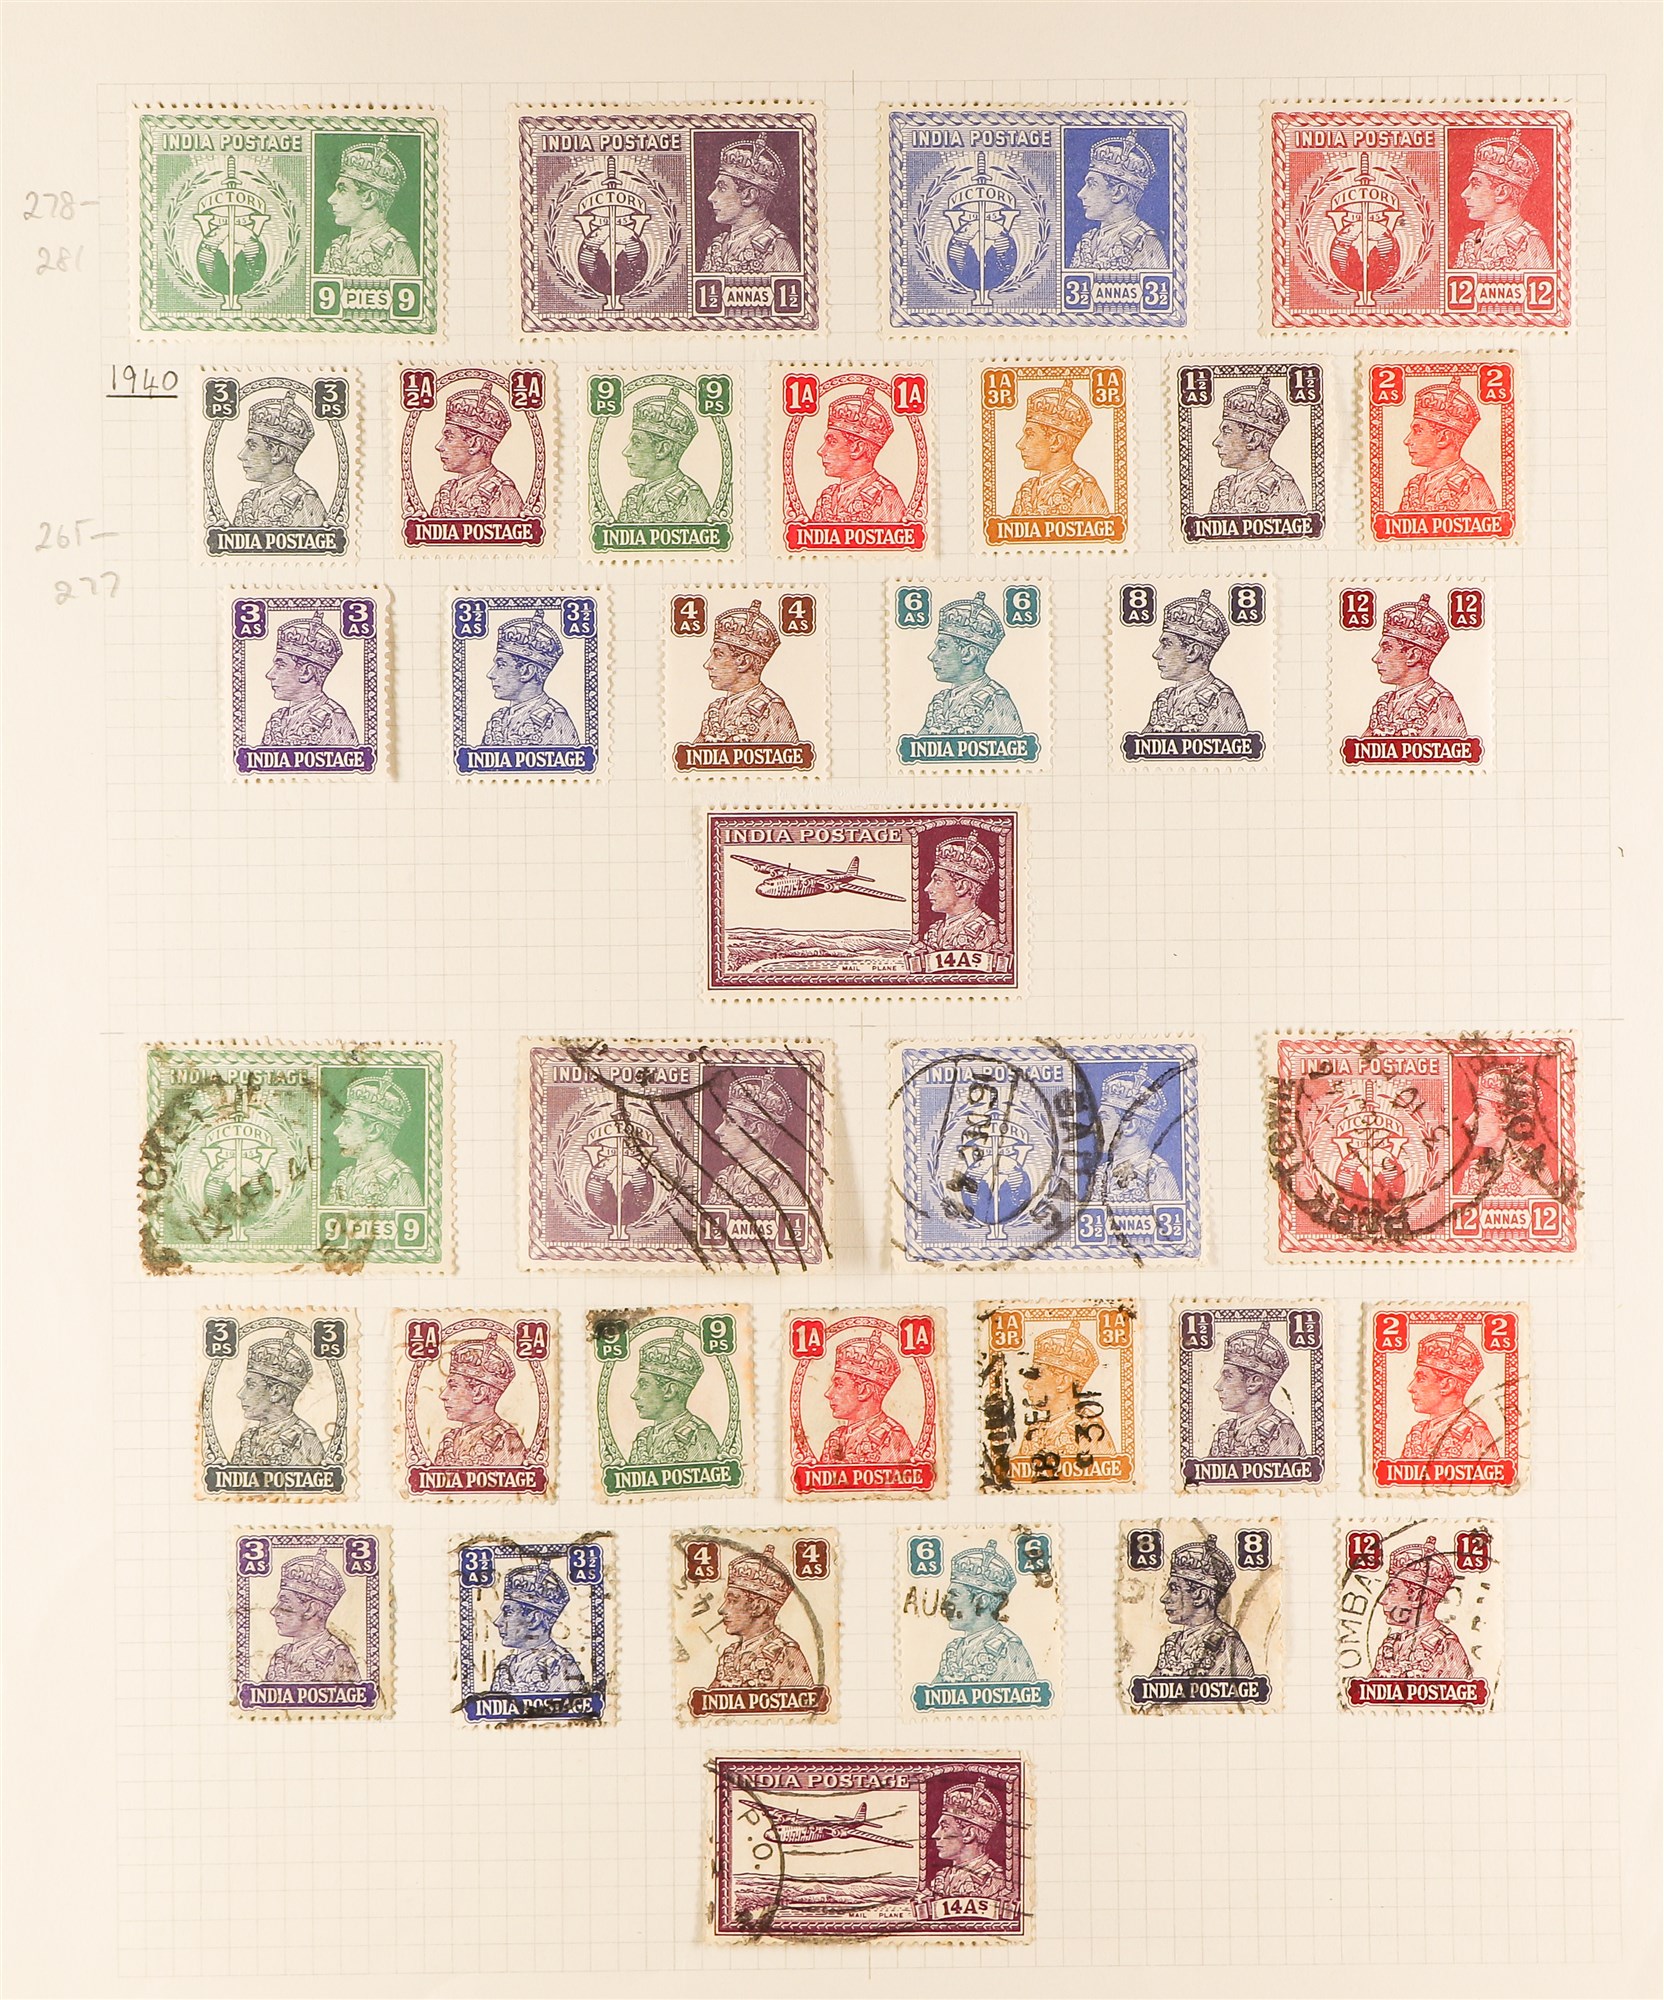 INDIA 1902 - 1943 OLD COLLECTION of 230+ mint & used stamps on 6 album pages. - Image 6 of 6